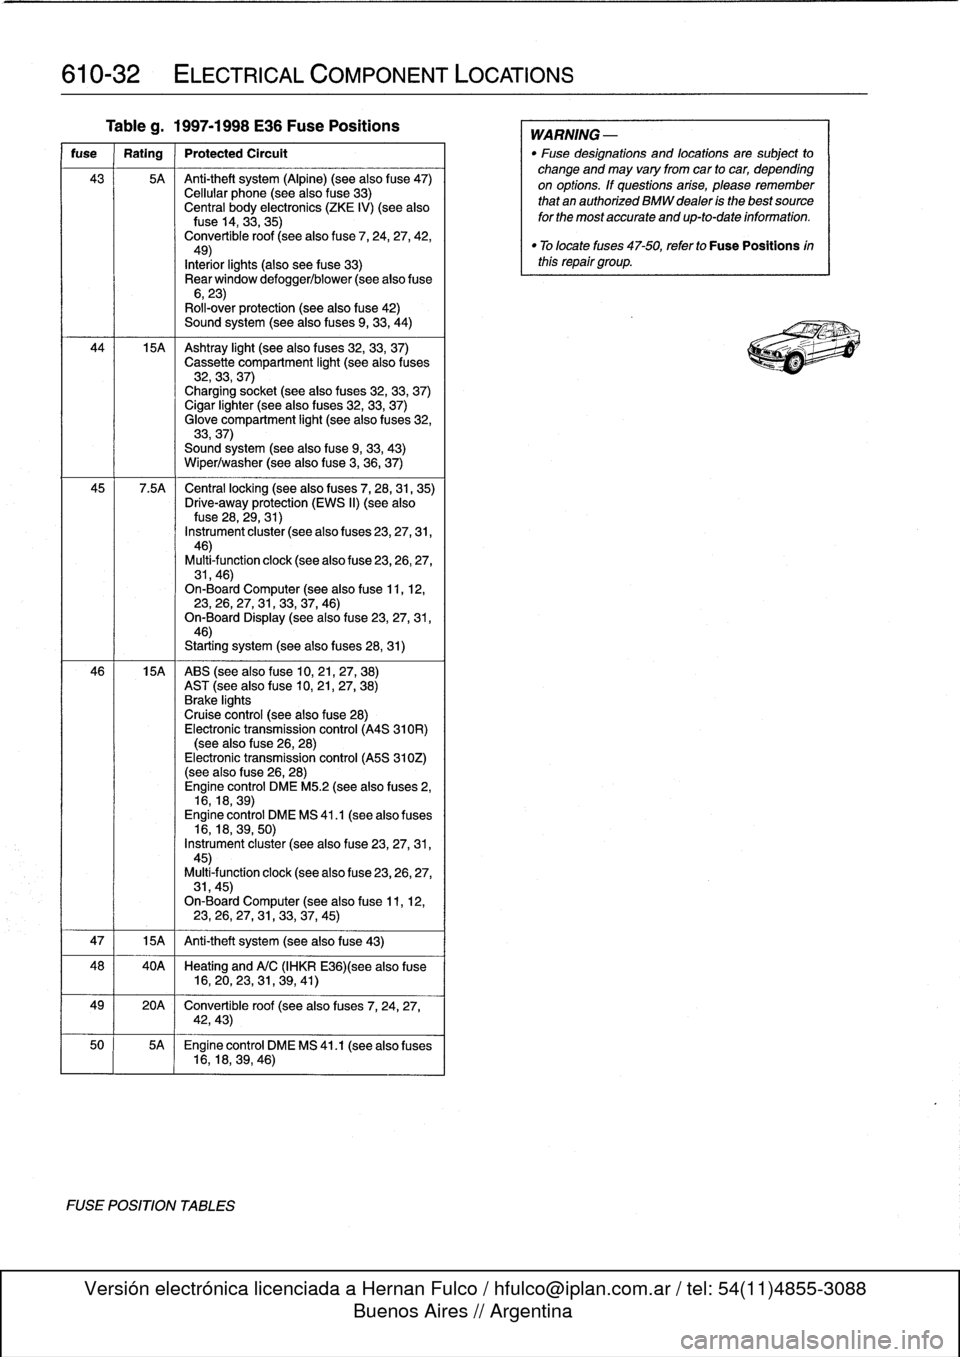 BMW 323i 1995 E36 User Guide 
610-32

	

ELECTRICAL
COMPONENT
LOCATIONS

Tableg
.
1997-1998
E36
Fuse
Positions

fuse

	

Rating

	

Protected
Circult

43

	

5A

	

Anti-theft
system
(Alpine)
(see
also
f
use47)
Cellular
phone
(se